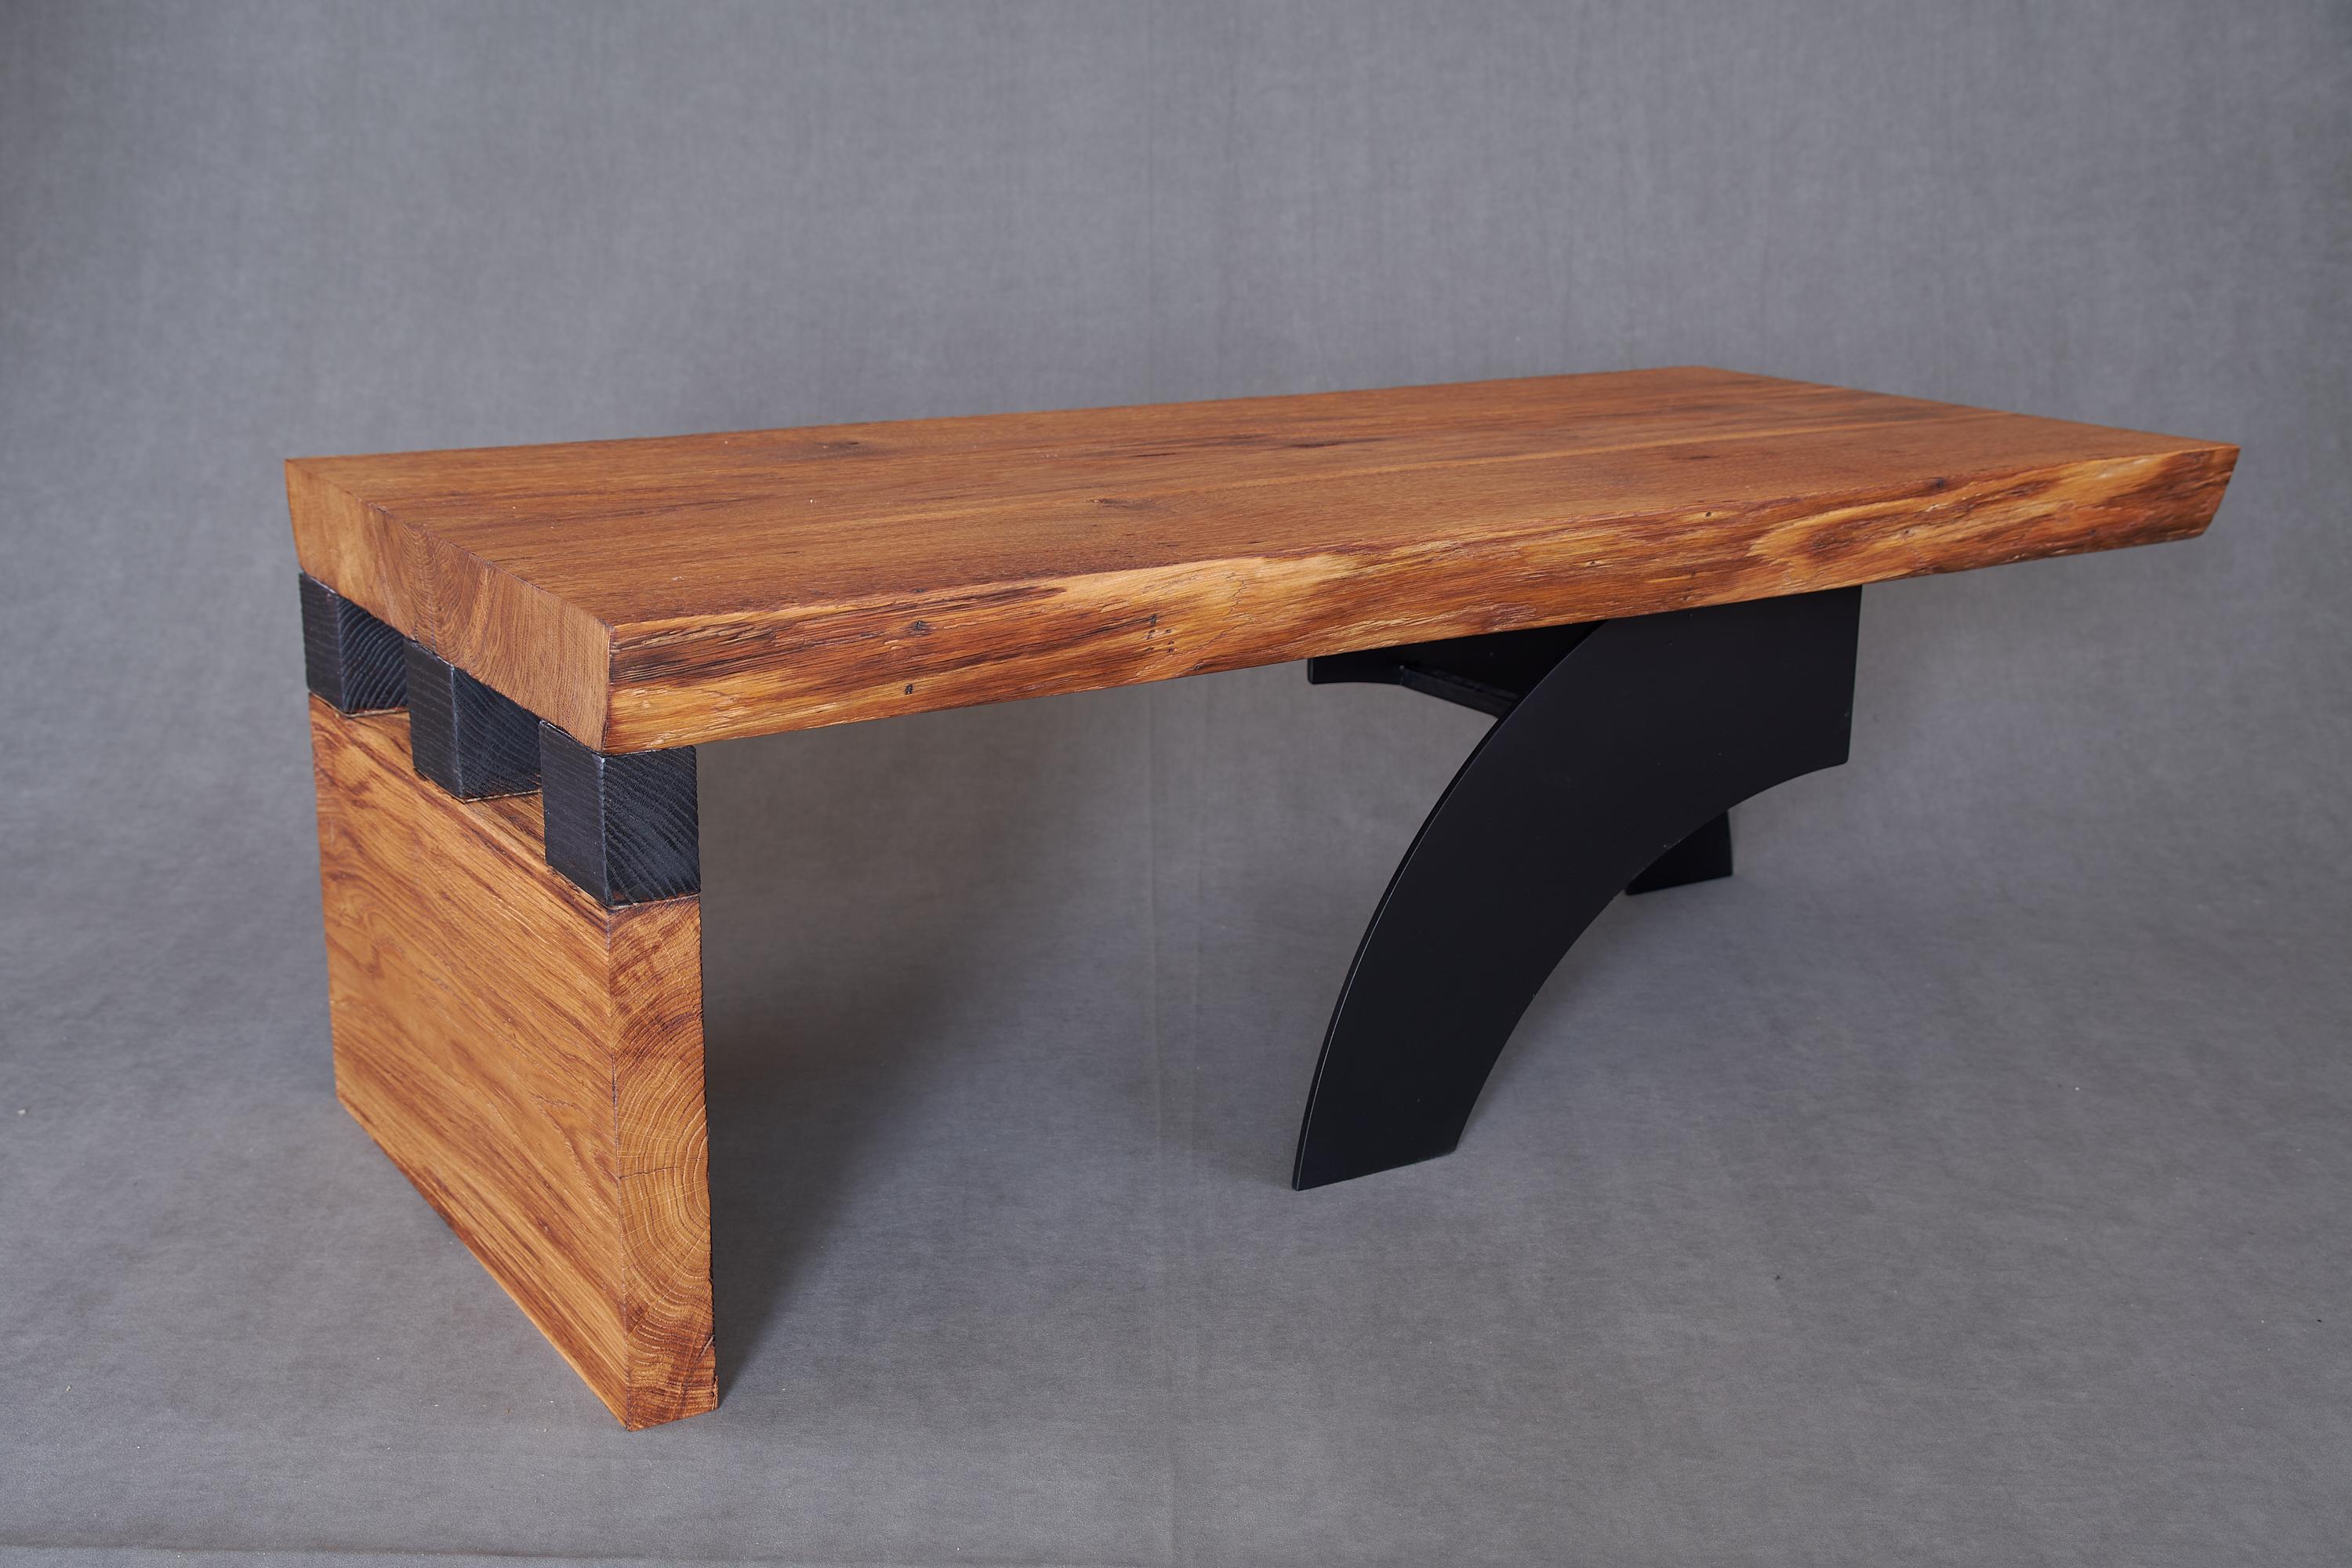 Dining table in contemporary style, made from massive oak in combination with steel, protected with the highest quality oils, ensuring durability for generations. Such unique handmade design will highlight your interior and bring comfort to your